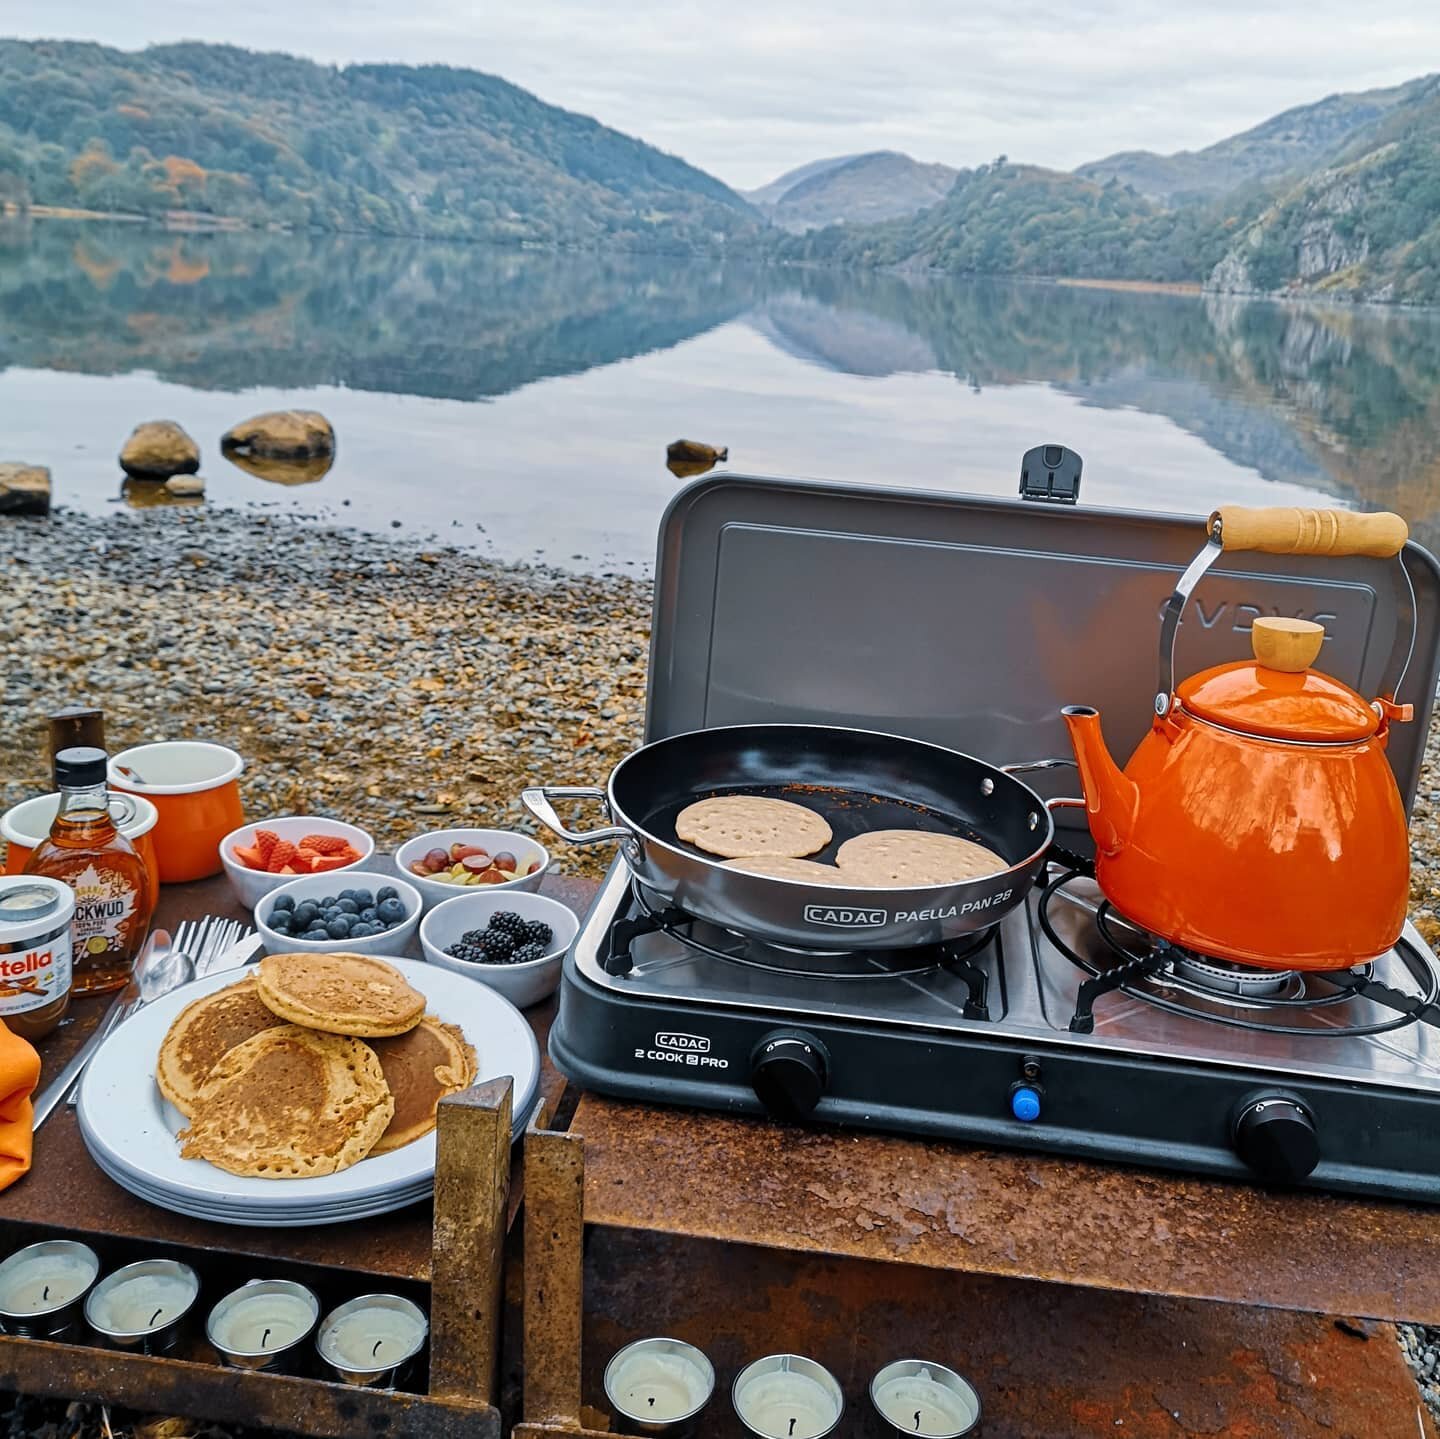 VANLIFE BREAKFAST 🍳🔥🍴

I love food 😜 but I also love adventure, so getting the balance right between spending time cooking for the family and adventuring is something I am always working on! 

My TOP TIPS are:
1: Take pre or part cooked meals
2: 